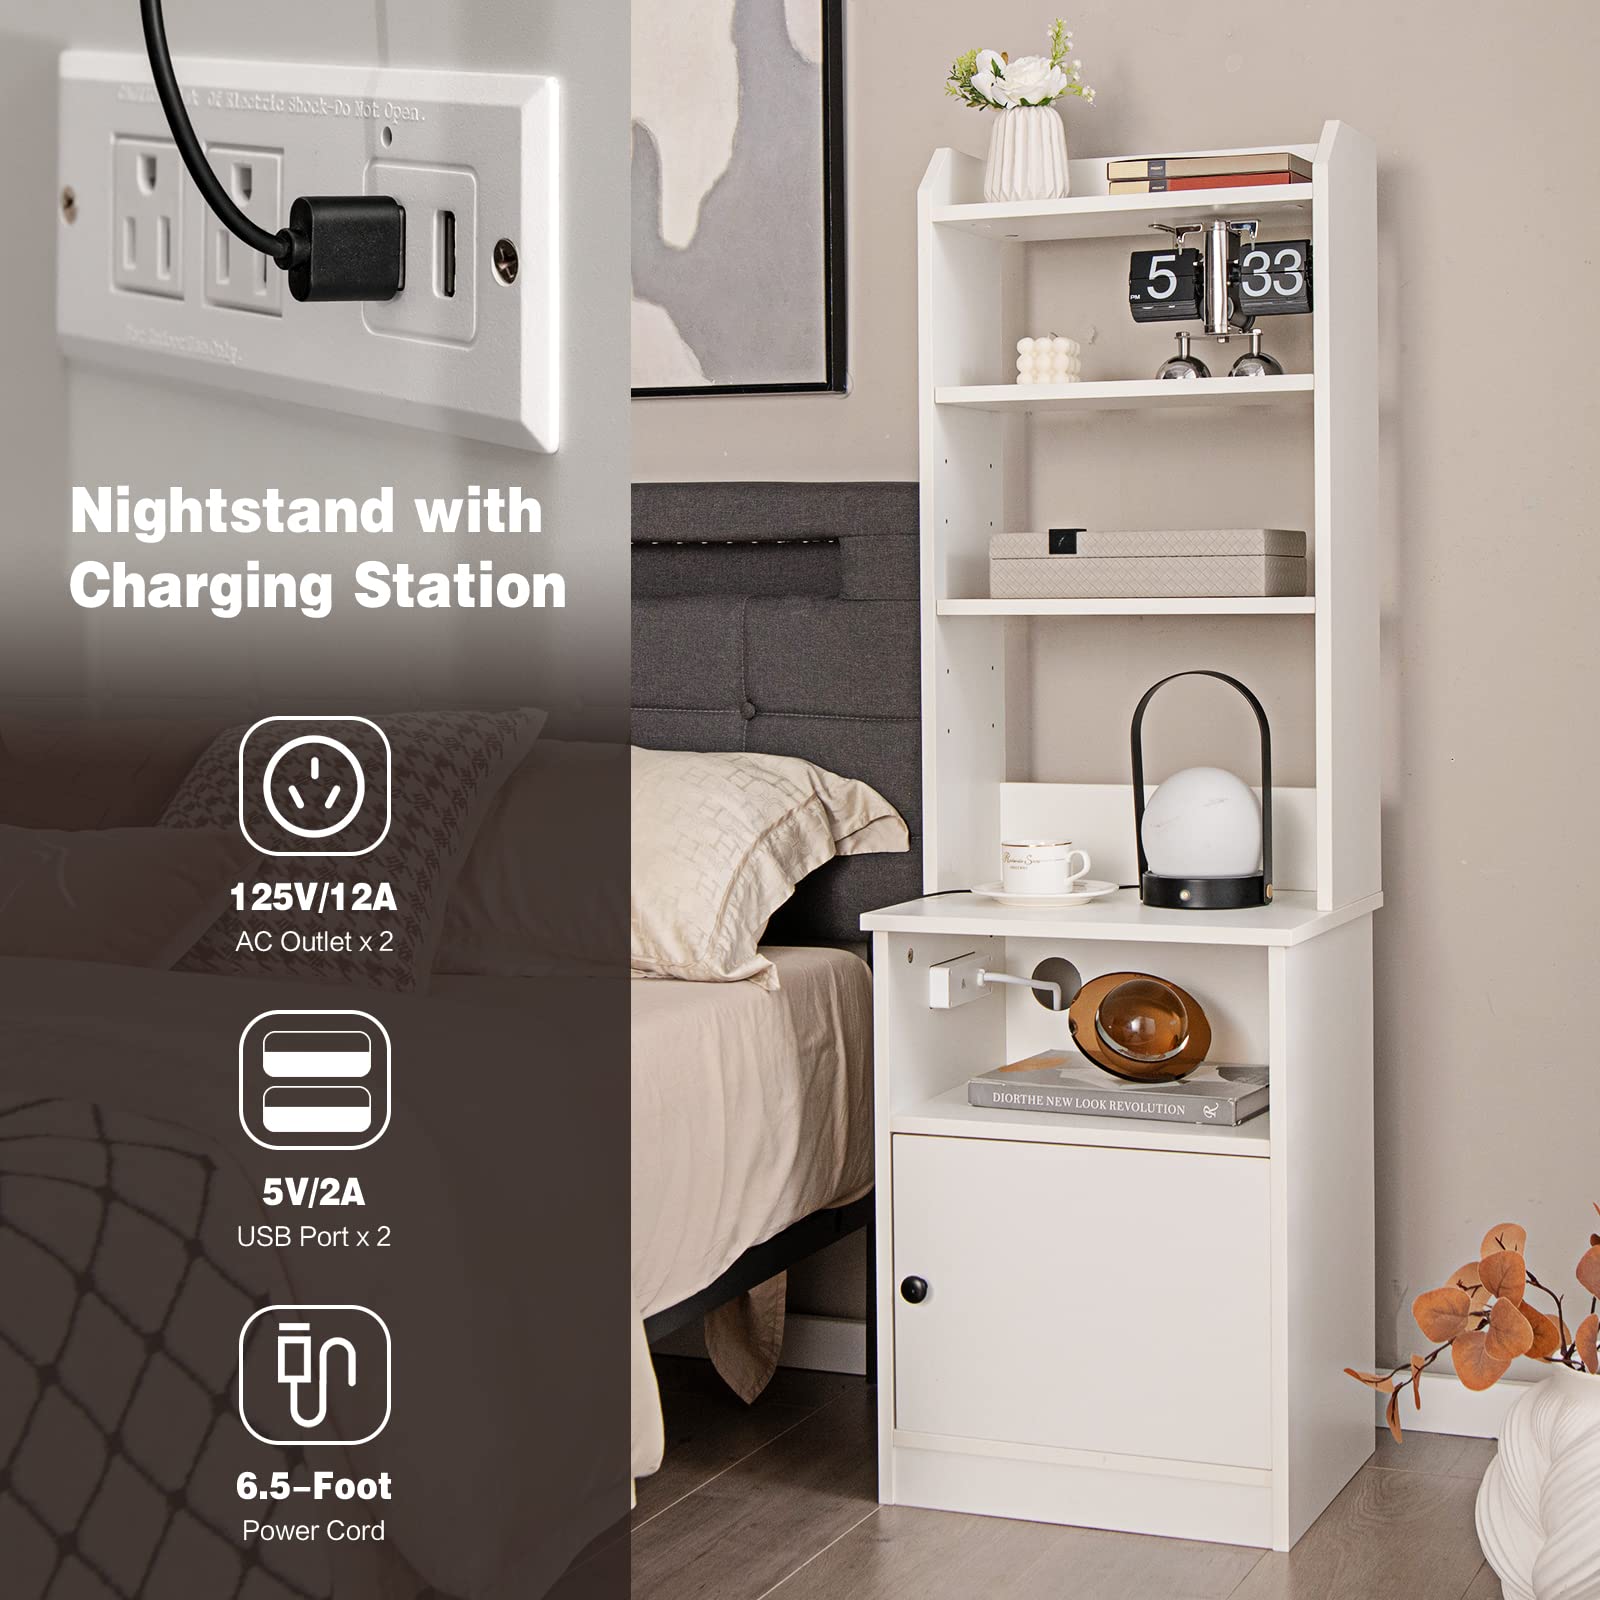 Giantex Nightstand with Charging Station - 55" Tall Bedside Table